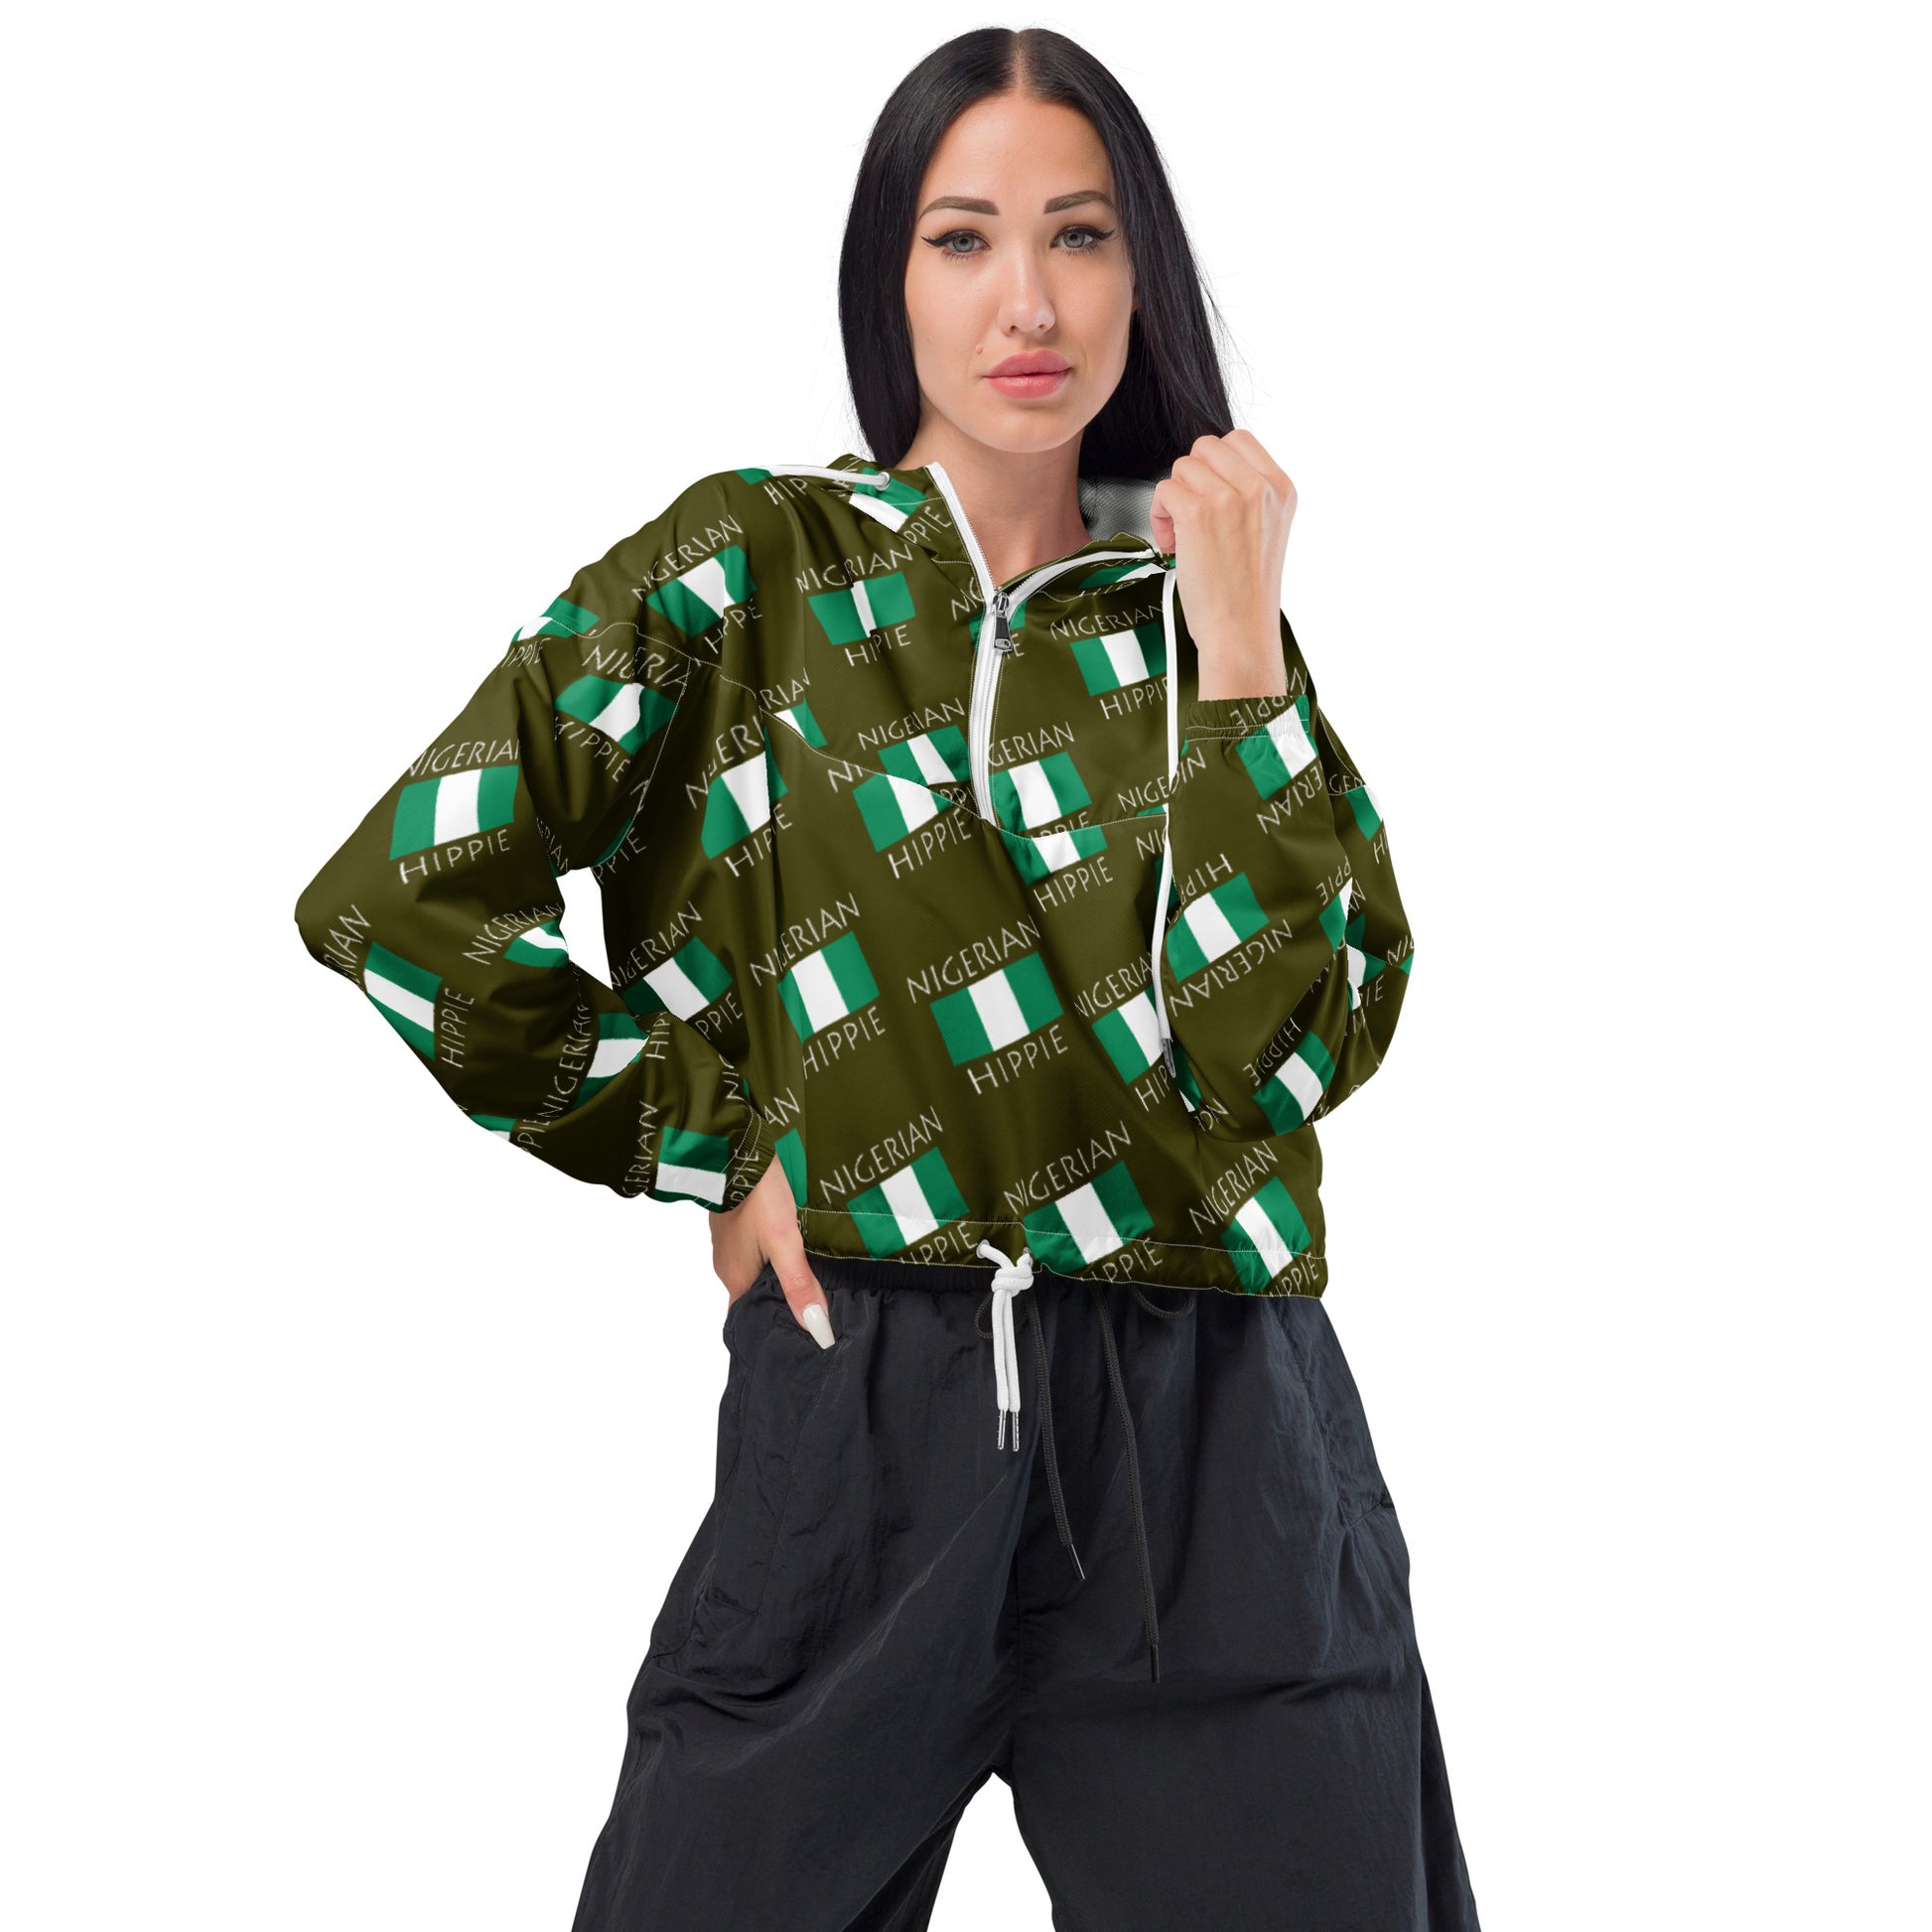 Your Nigerian Flag Hippie cropped hoodie half zip is a fashion statement...and super practical. Lightweight, waterproof and ready for any adventure and you will look fantastic with our repeating flag hippie design. Includes side-slit pockets, breathable mesh lining, and adjustable draw cords on the hood and waist to support all your stylish outdoor looks.